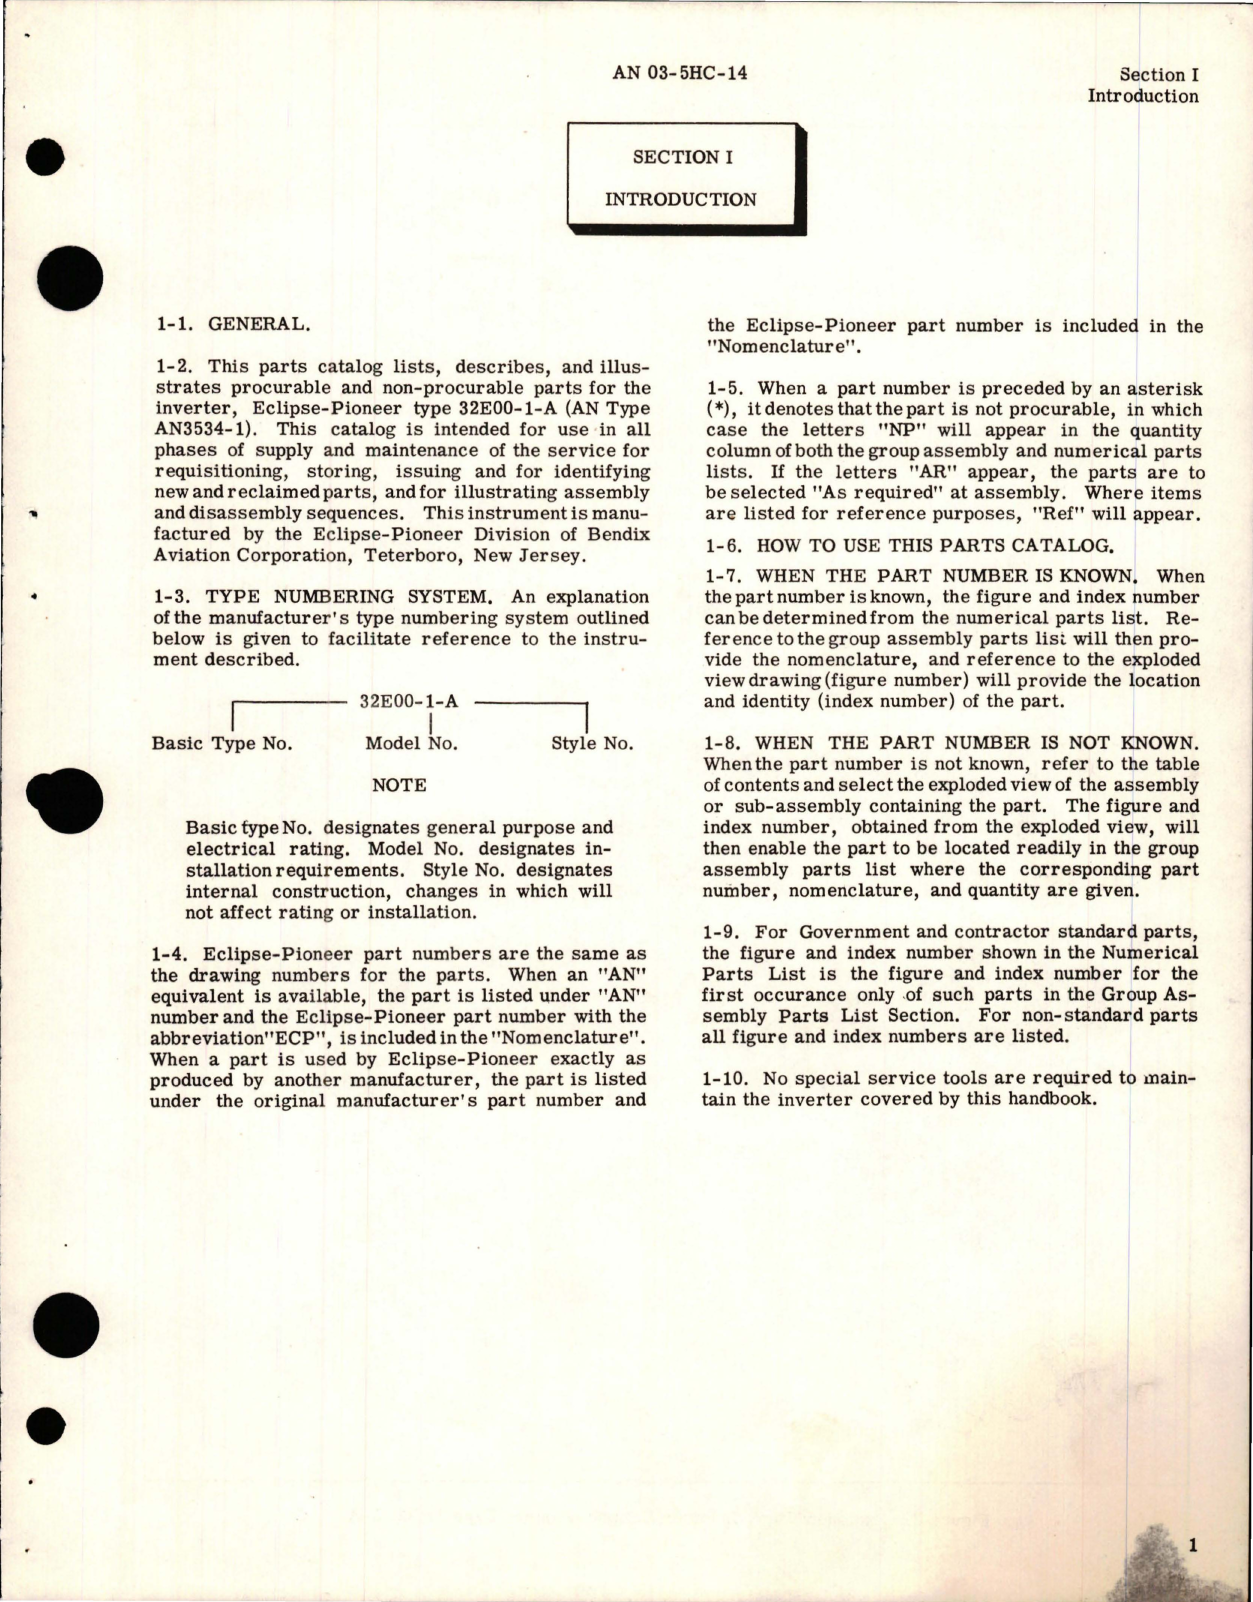 Sample page 5 from AirCorps Library document: Parts Catalog for Inverter - Type AN-3534-1 - Part 32E00-1-A 